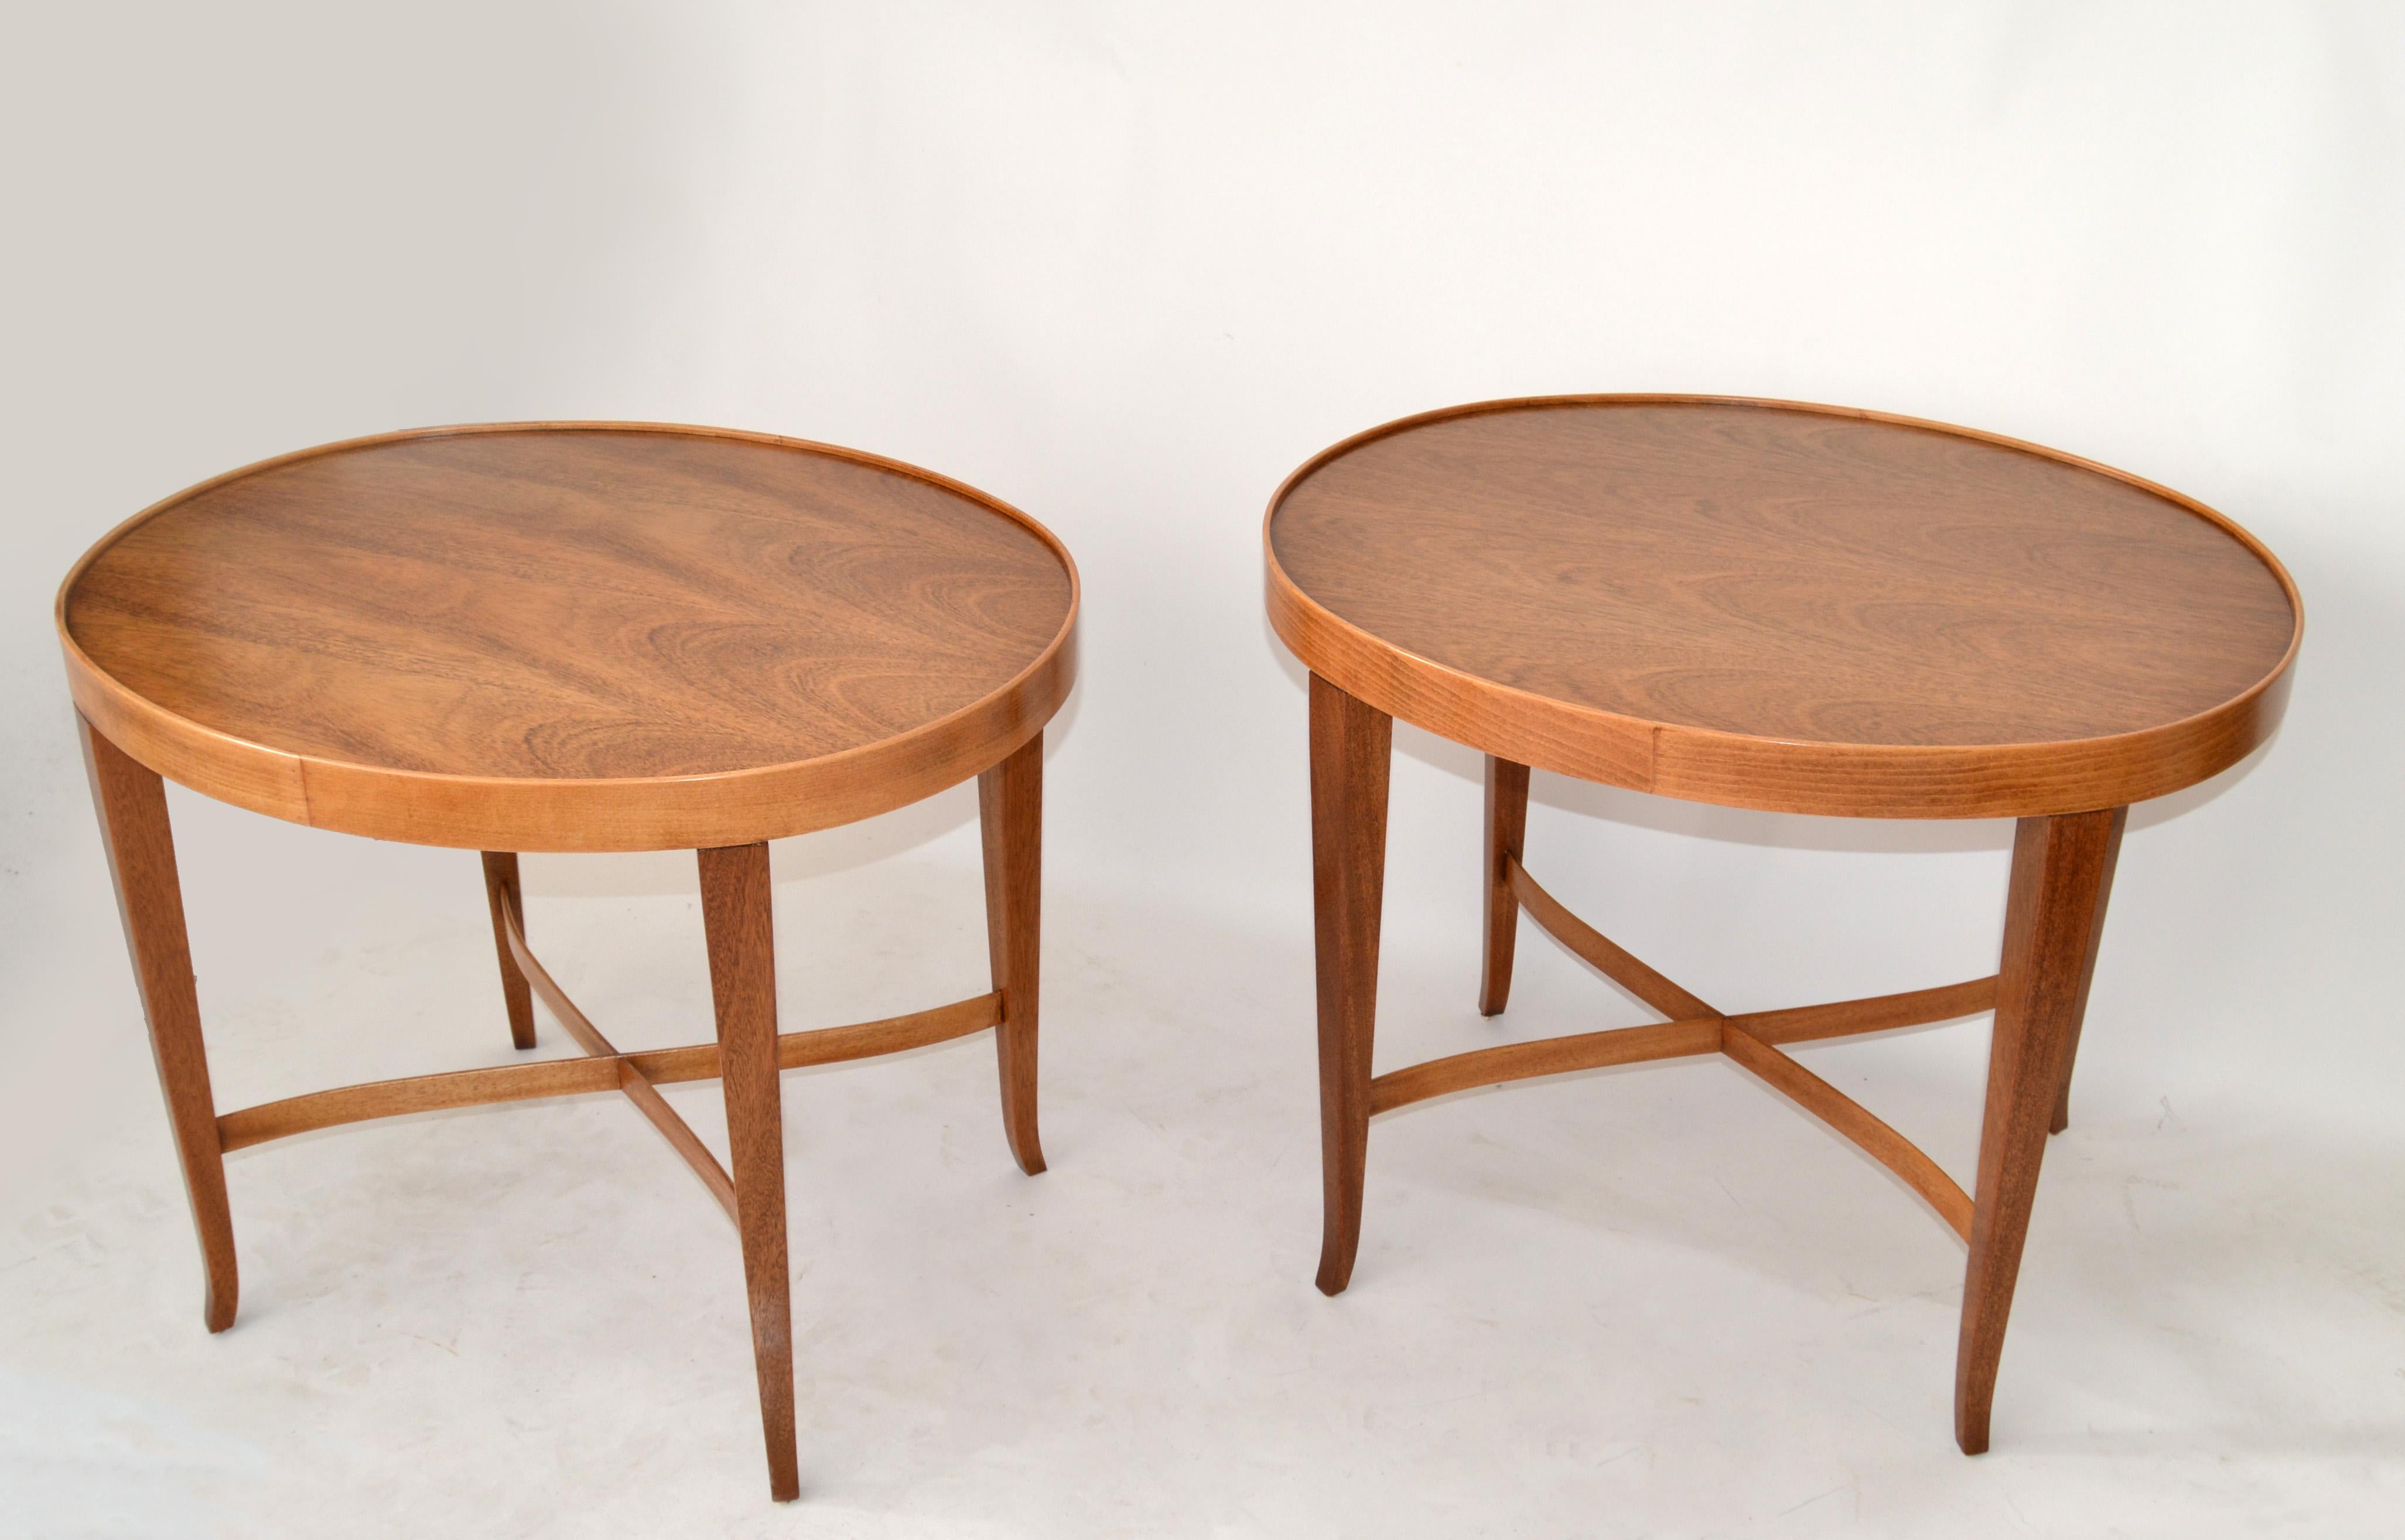 A Pair of fully restored oval Walnut Side Tables from The Barbara Barry Collection and made in the USA by the Baker Furniture Company.
Features linked cross stretchers bases, oval tops and a band around the border.
Note the beautiful grain